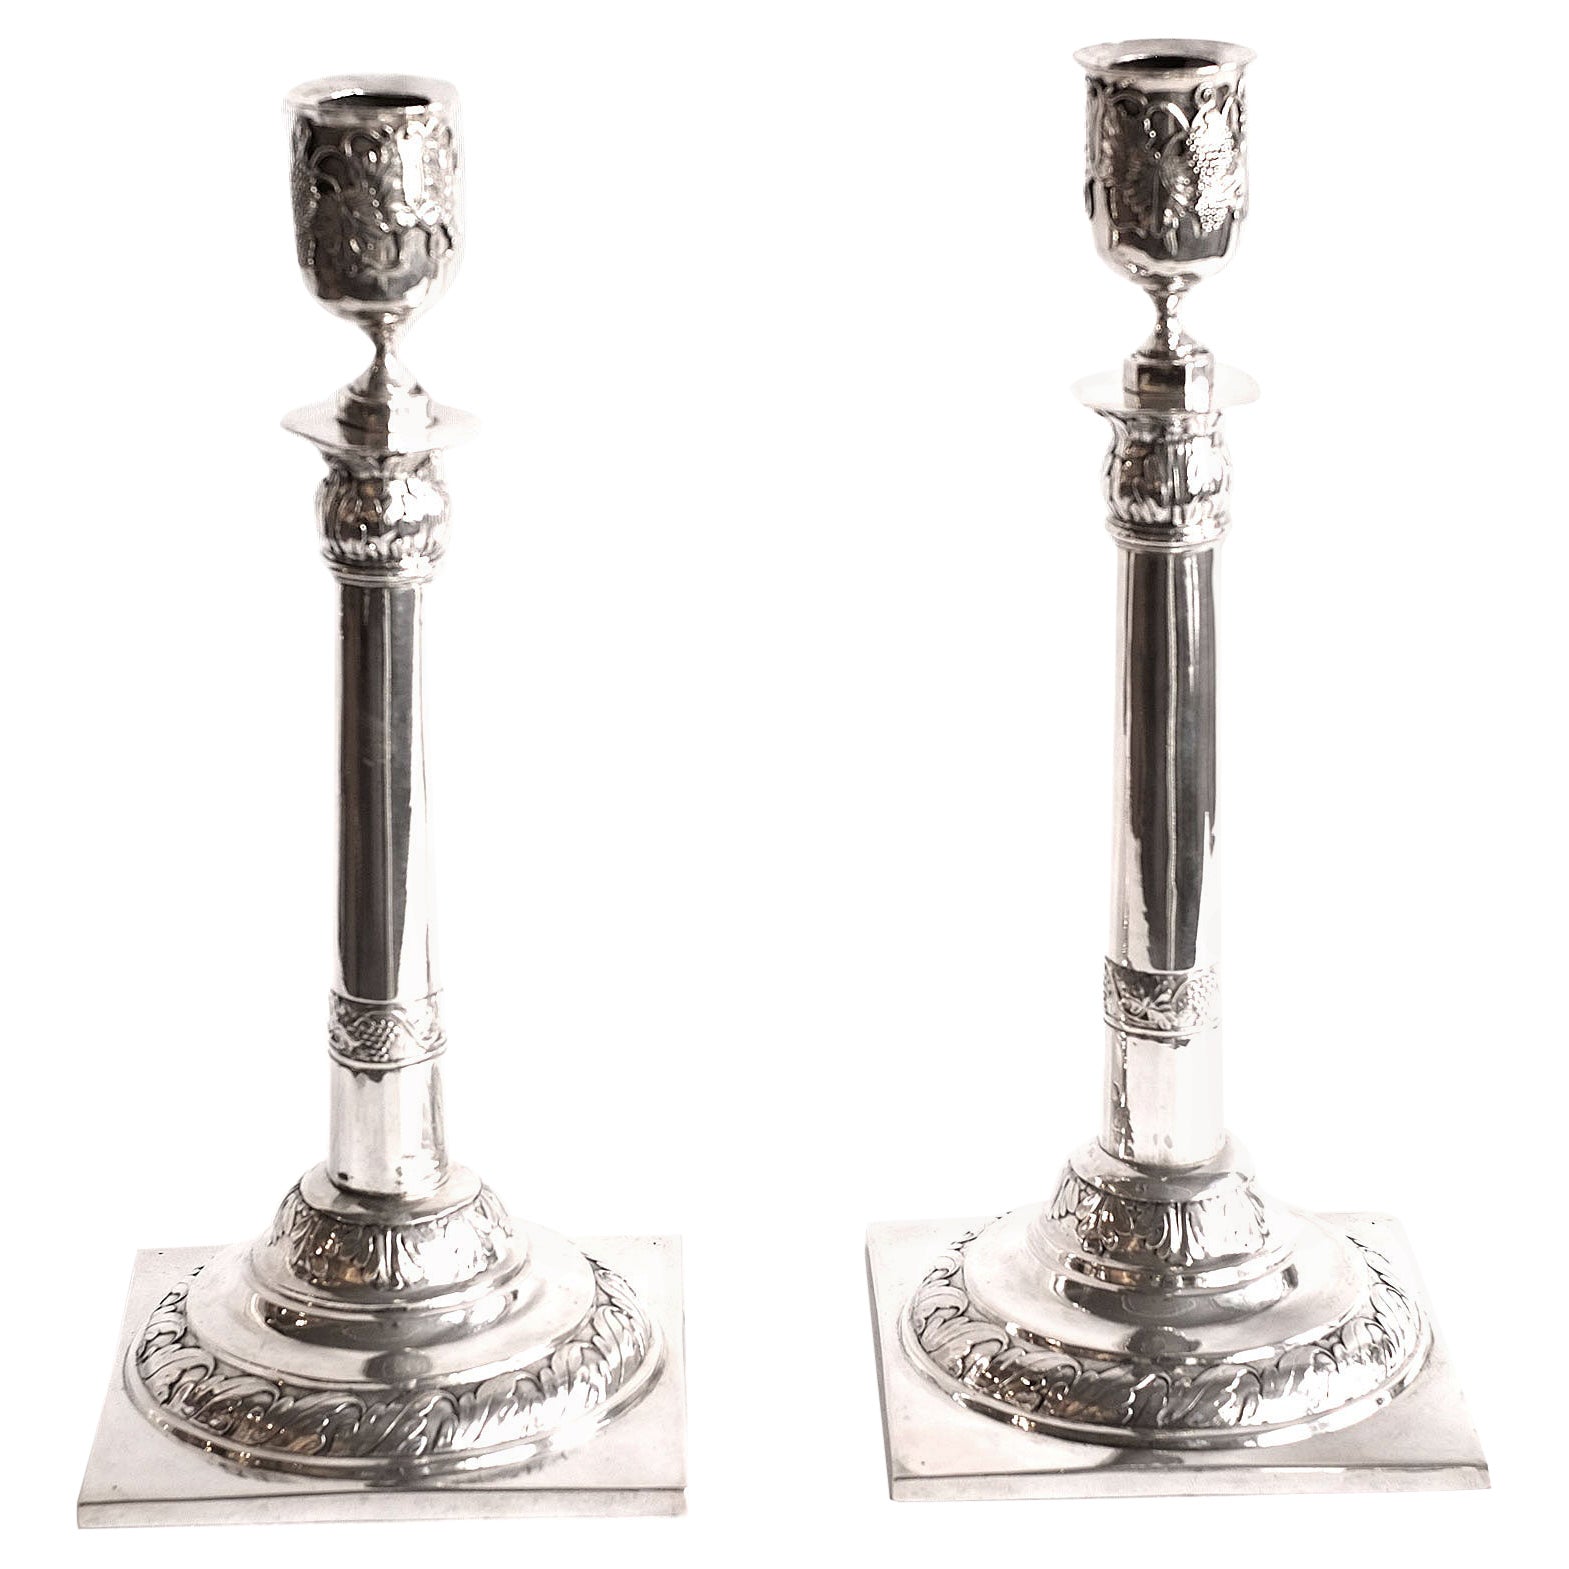 Neoclassical Pair of Silver Candlesticks A.F Burgmüller Leipzig Weissenfels 1820